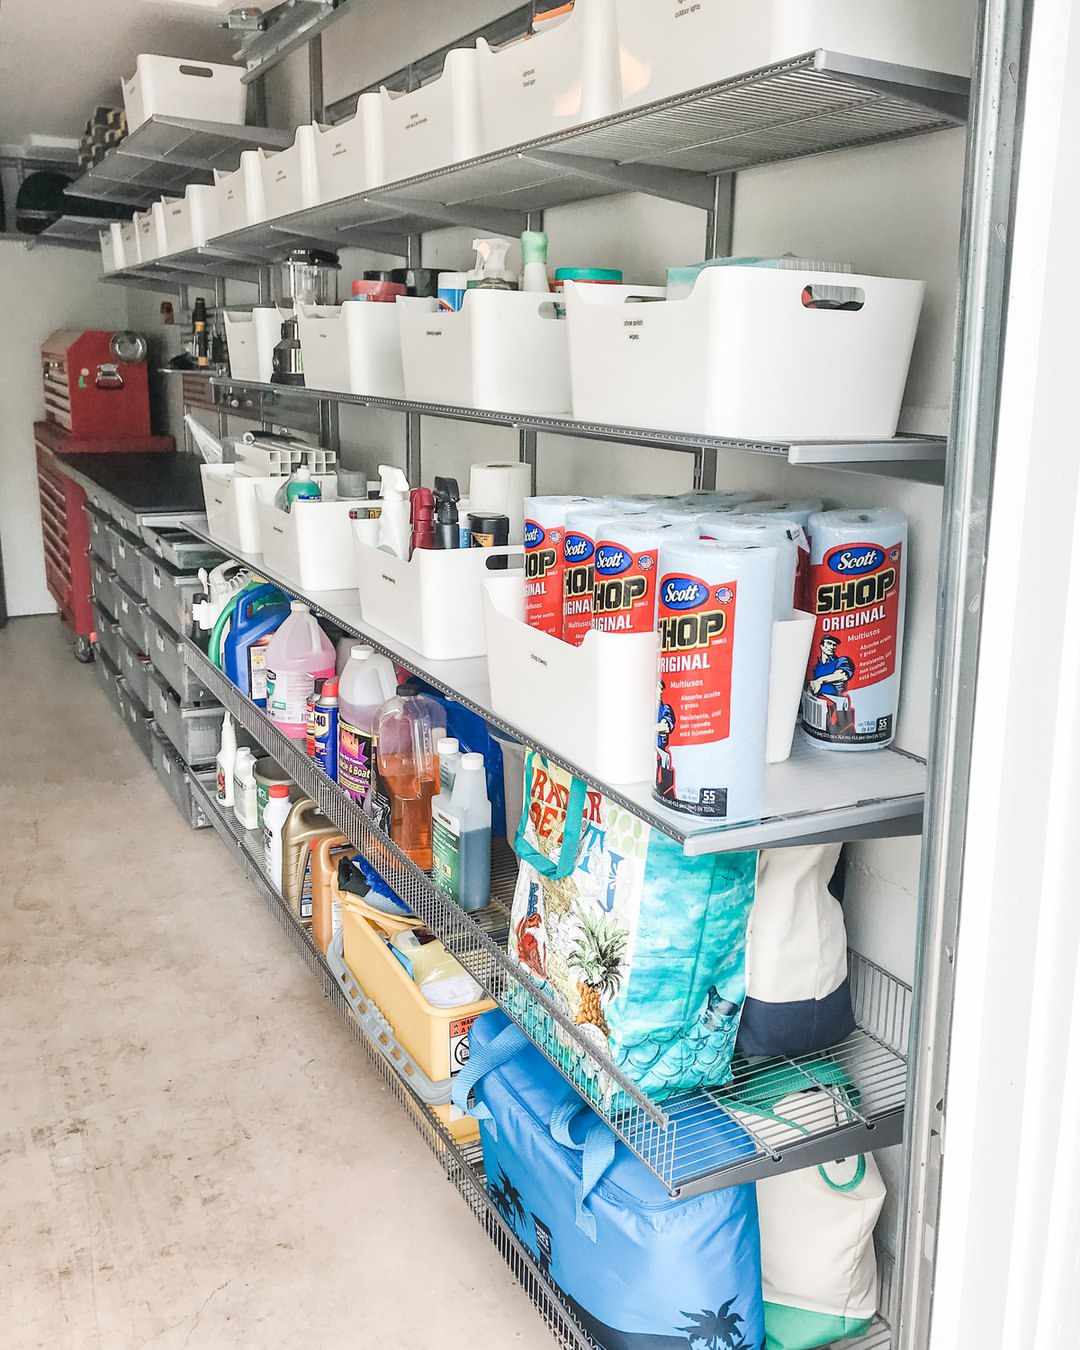 Cleaning supplies stored in plastic bins on garage shelves